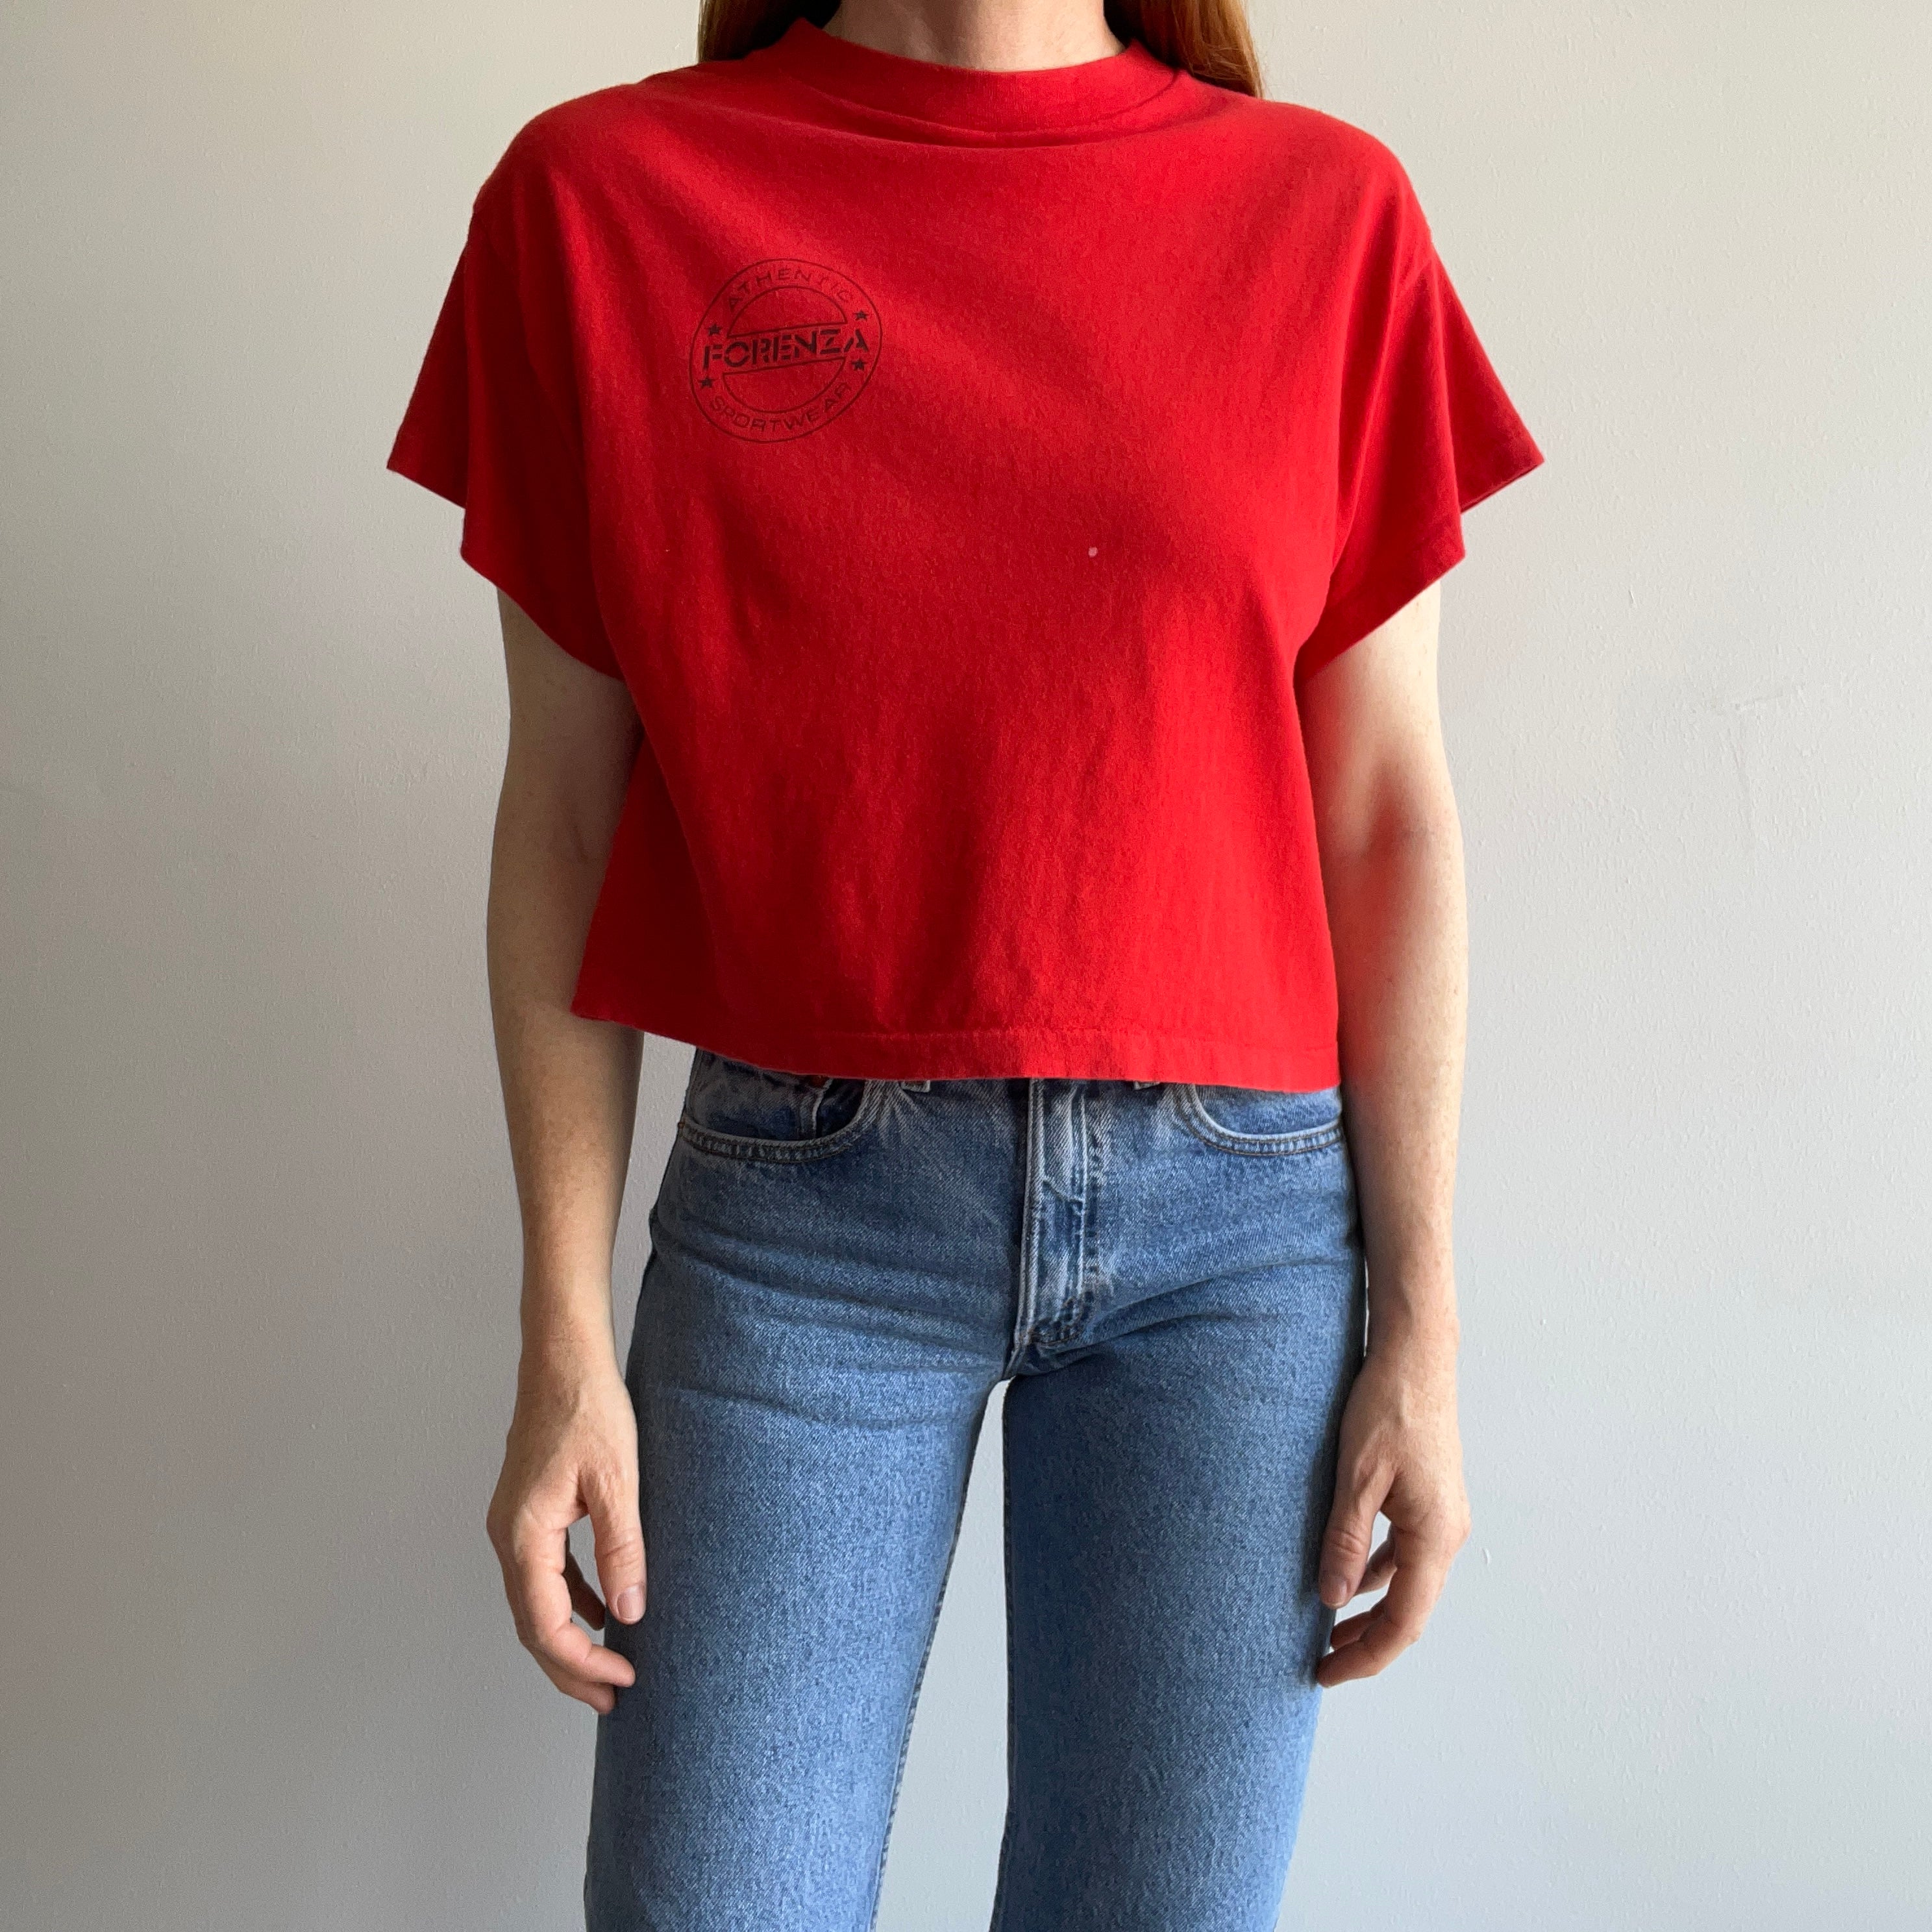 1980s Red Forenza Crop Top